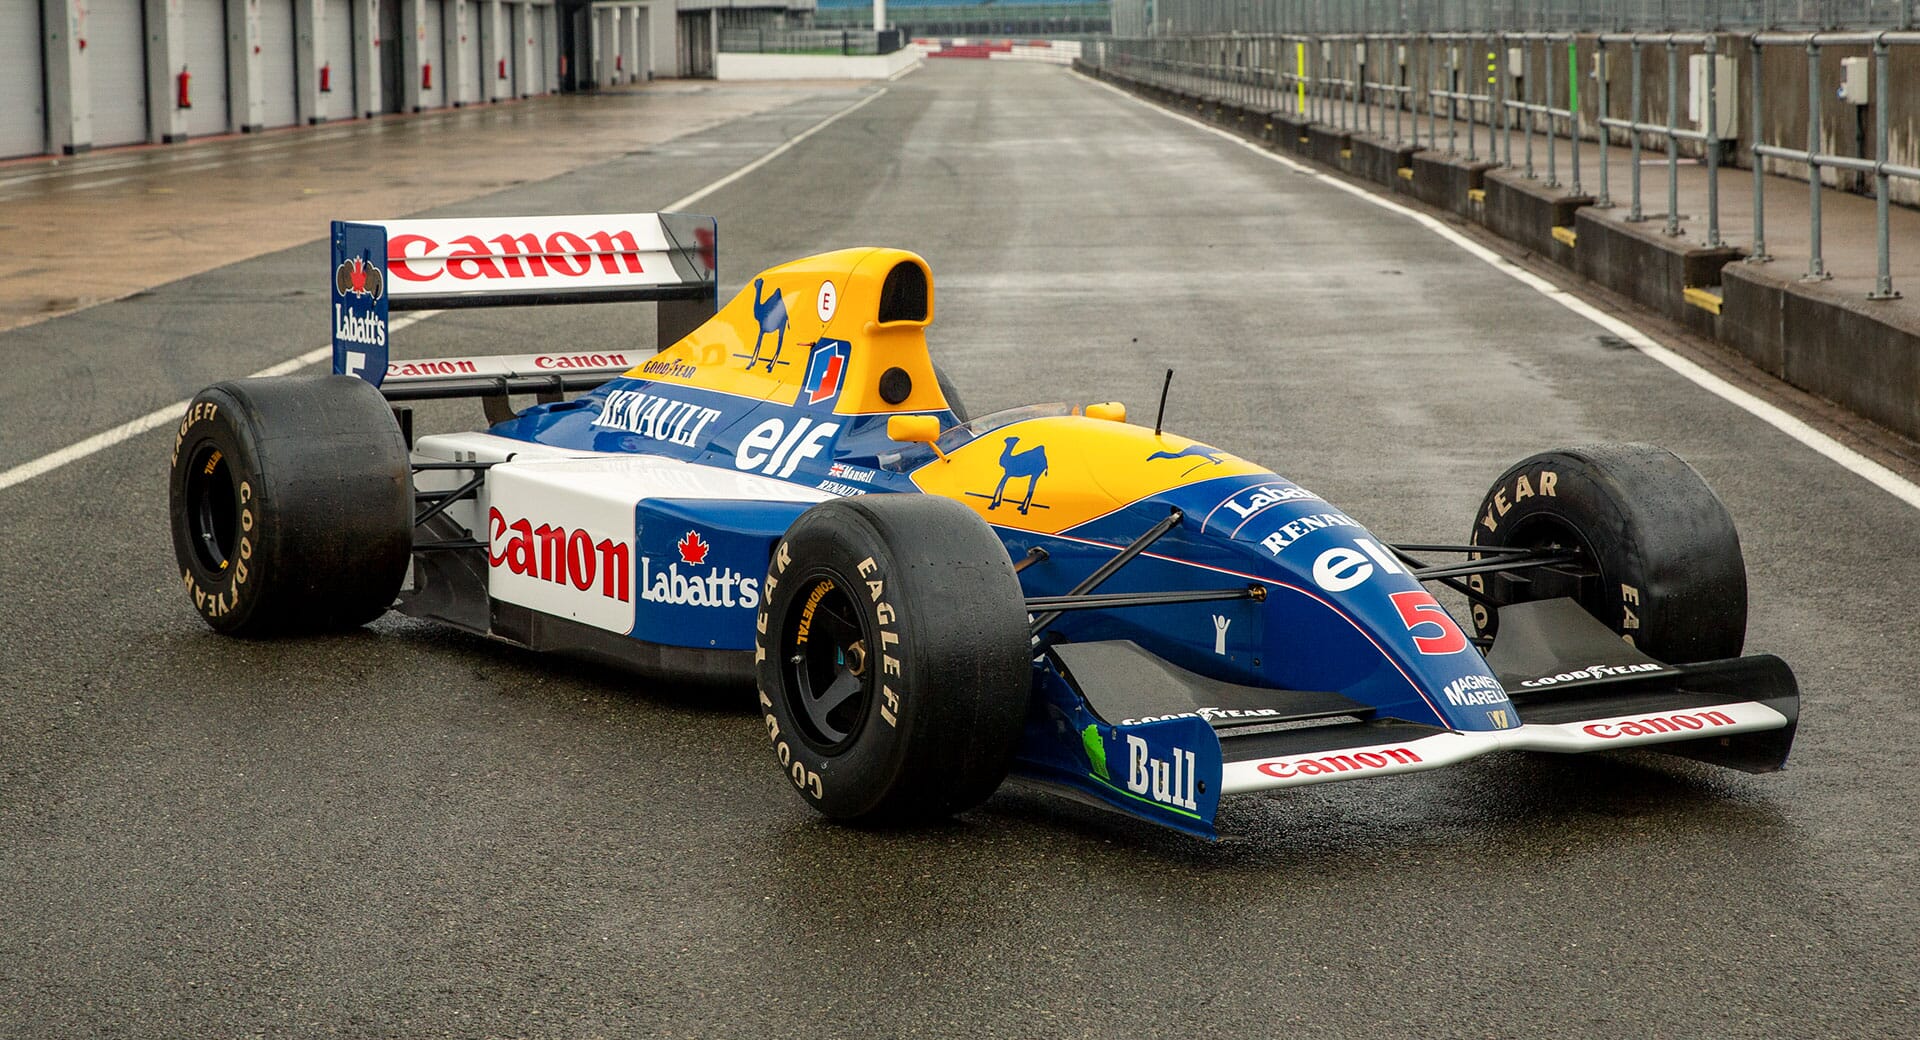 One of the most significant Formula One Cars of all time